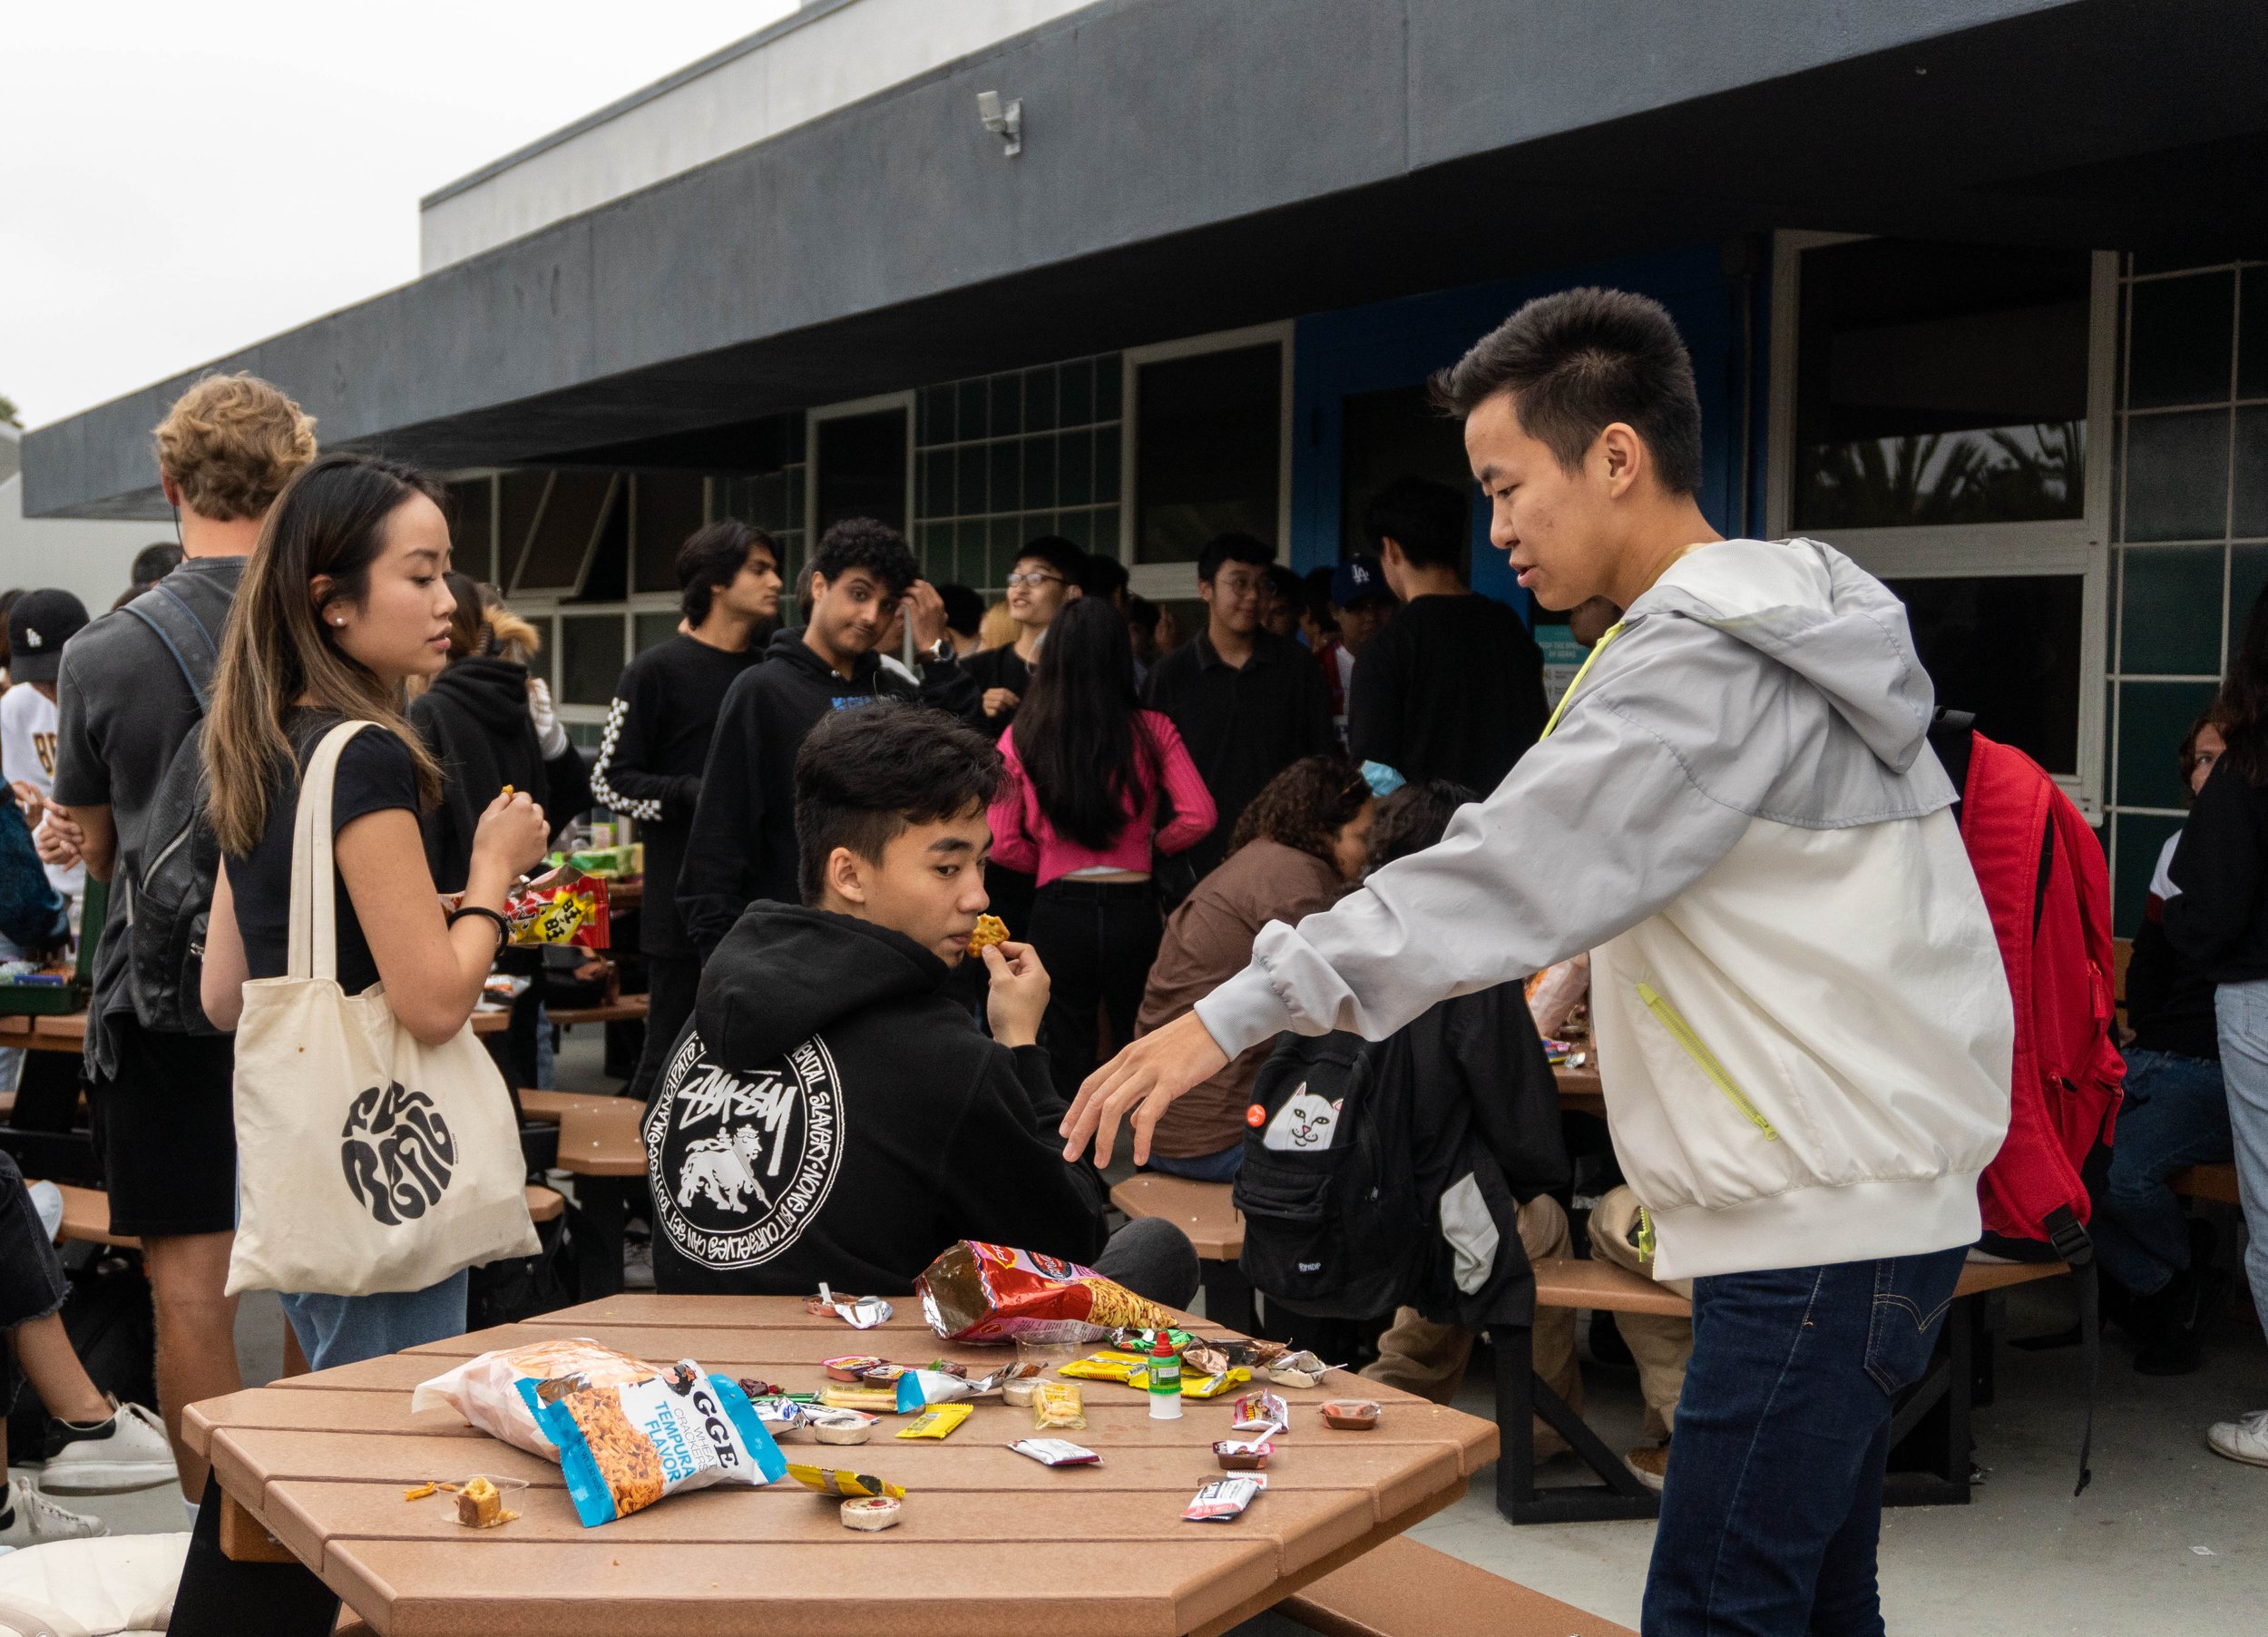  Cambodian International student, Orgil Boldbaatar about to pick a snack from the table filled with assortments of treats from all over the world during Snacks Appreciation Day. The event was held by the Santa Monica College International Student For